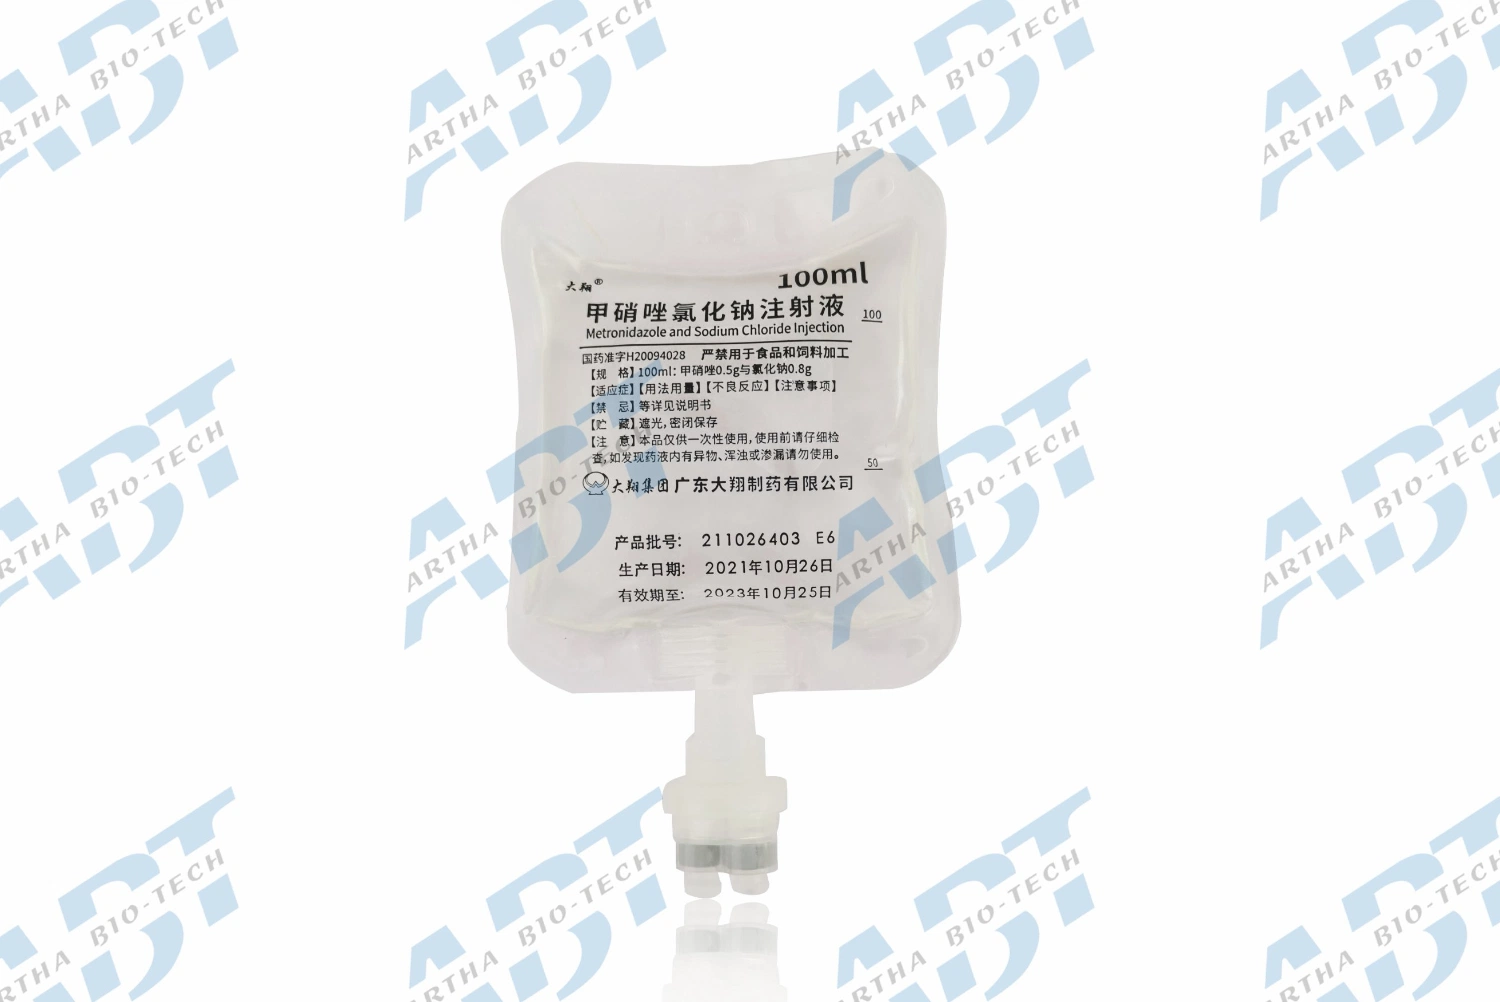 Other Medicine/Medical Products/Finished Medicine/Drug/Infusion/Intravenous Metronidazole and Sodium Chloride Injection 100ml